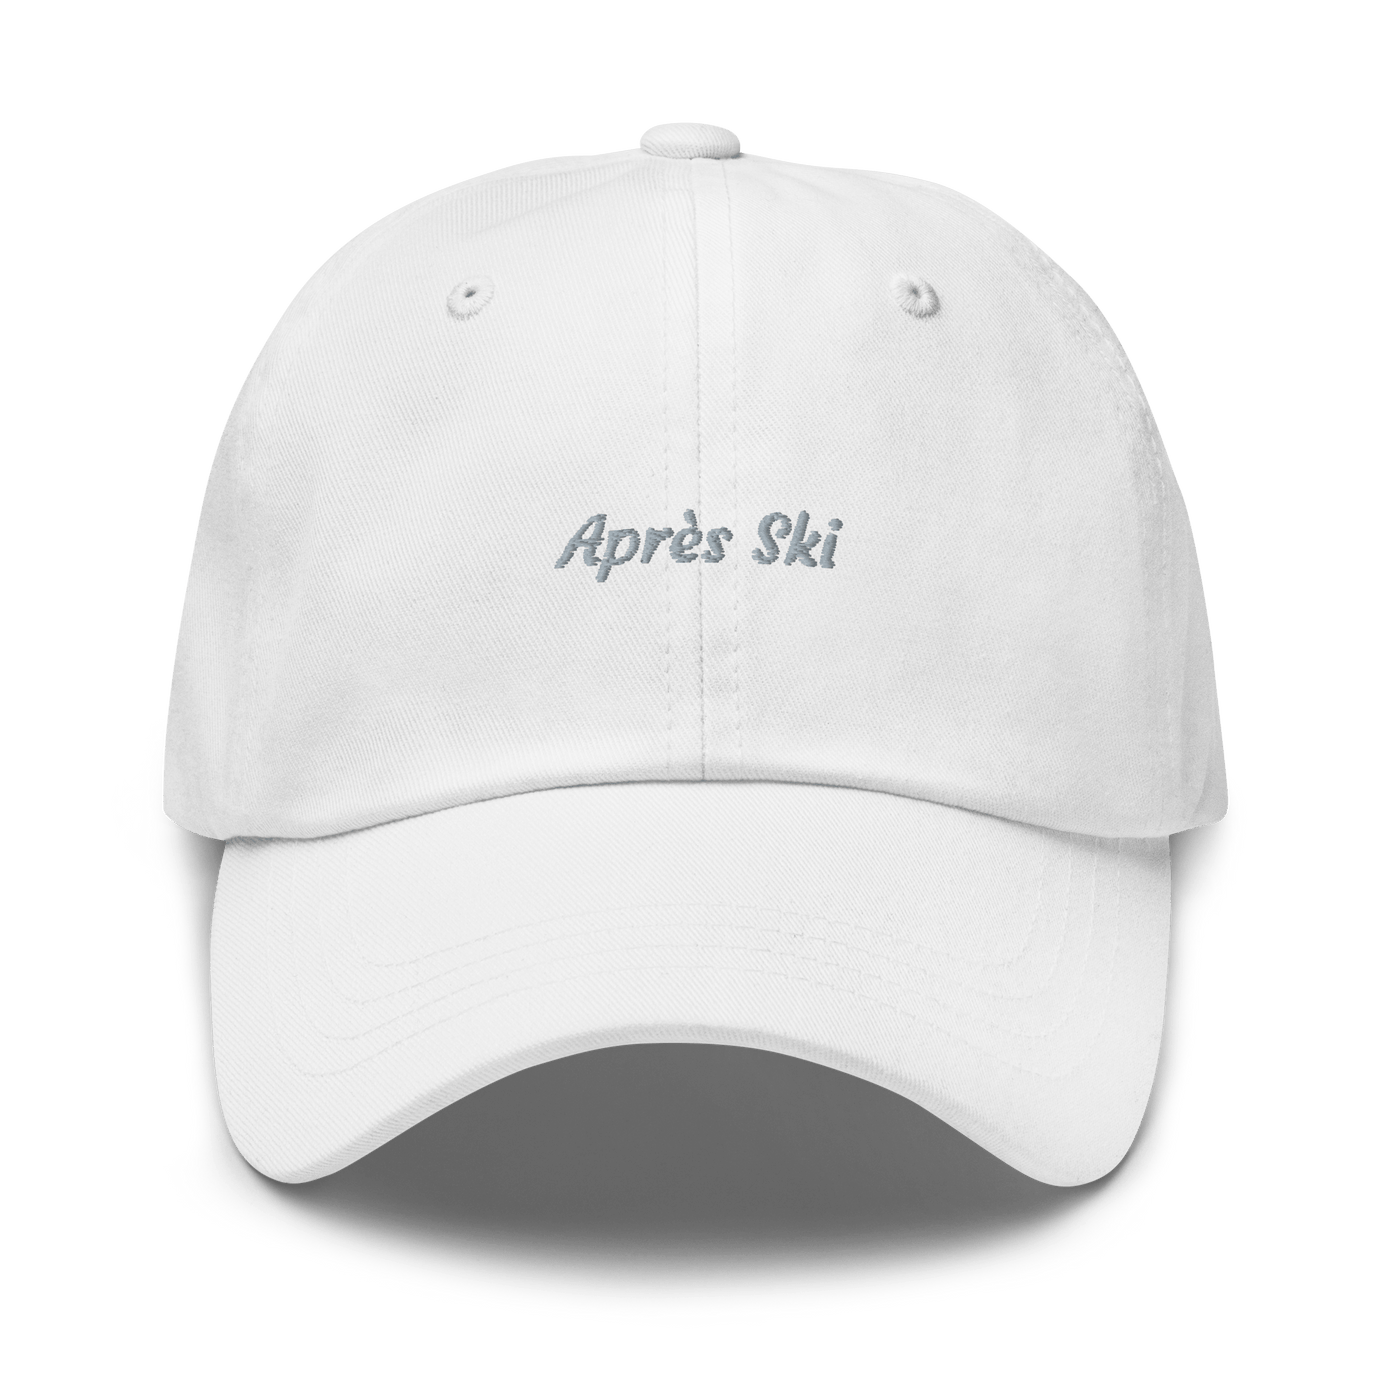 Après Ski Dad hat - White - - Just Another Cap Store